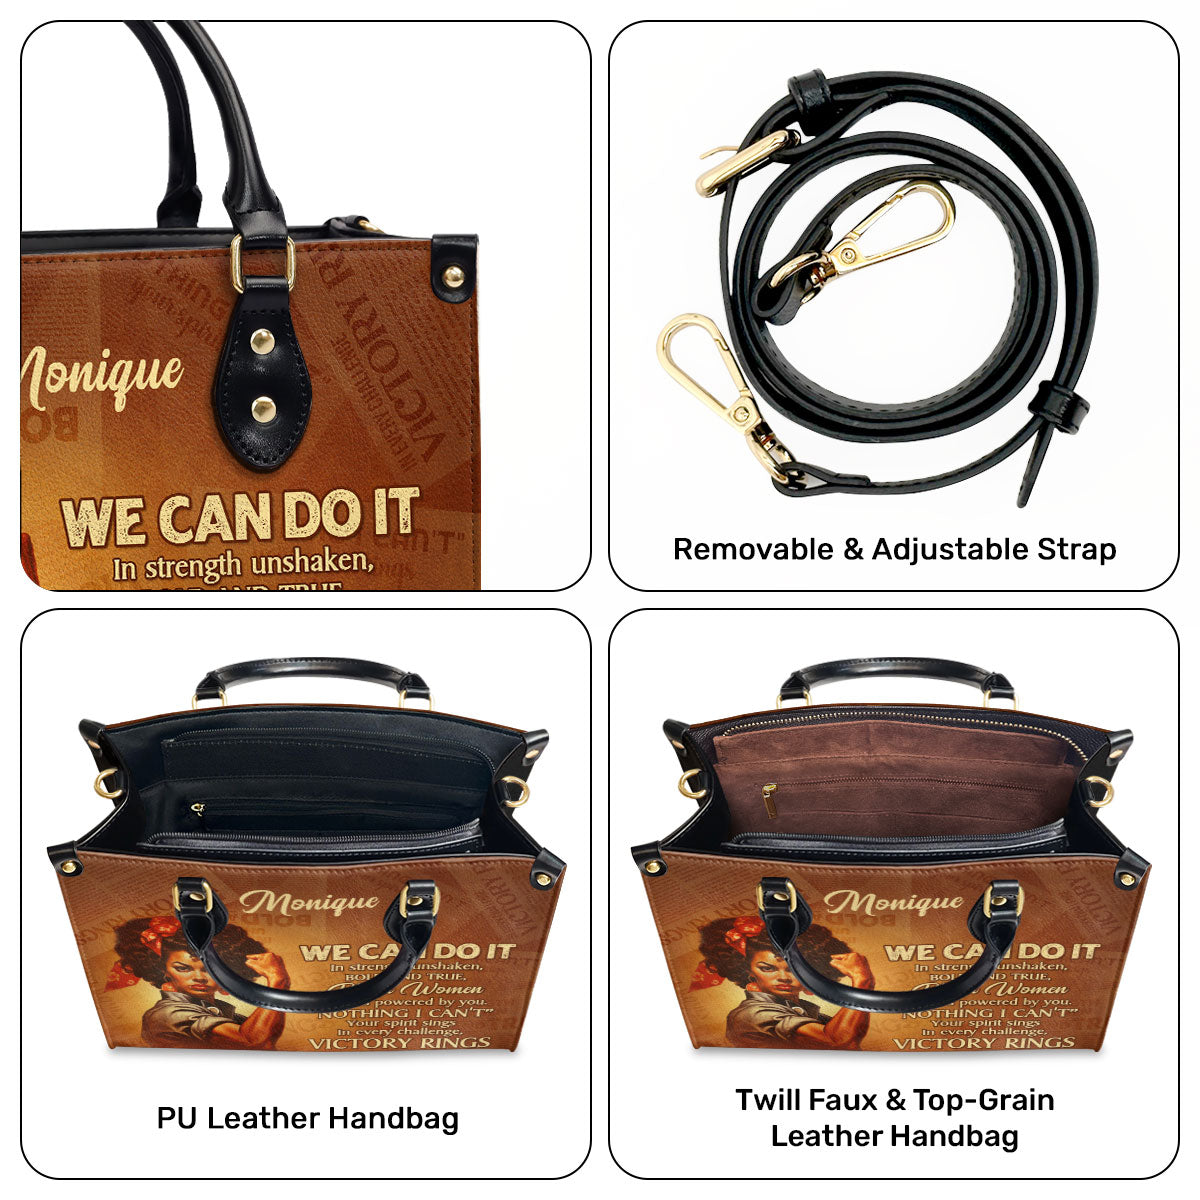 We Can Do it - Personalized Leather Handbag STB163